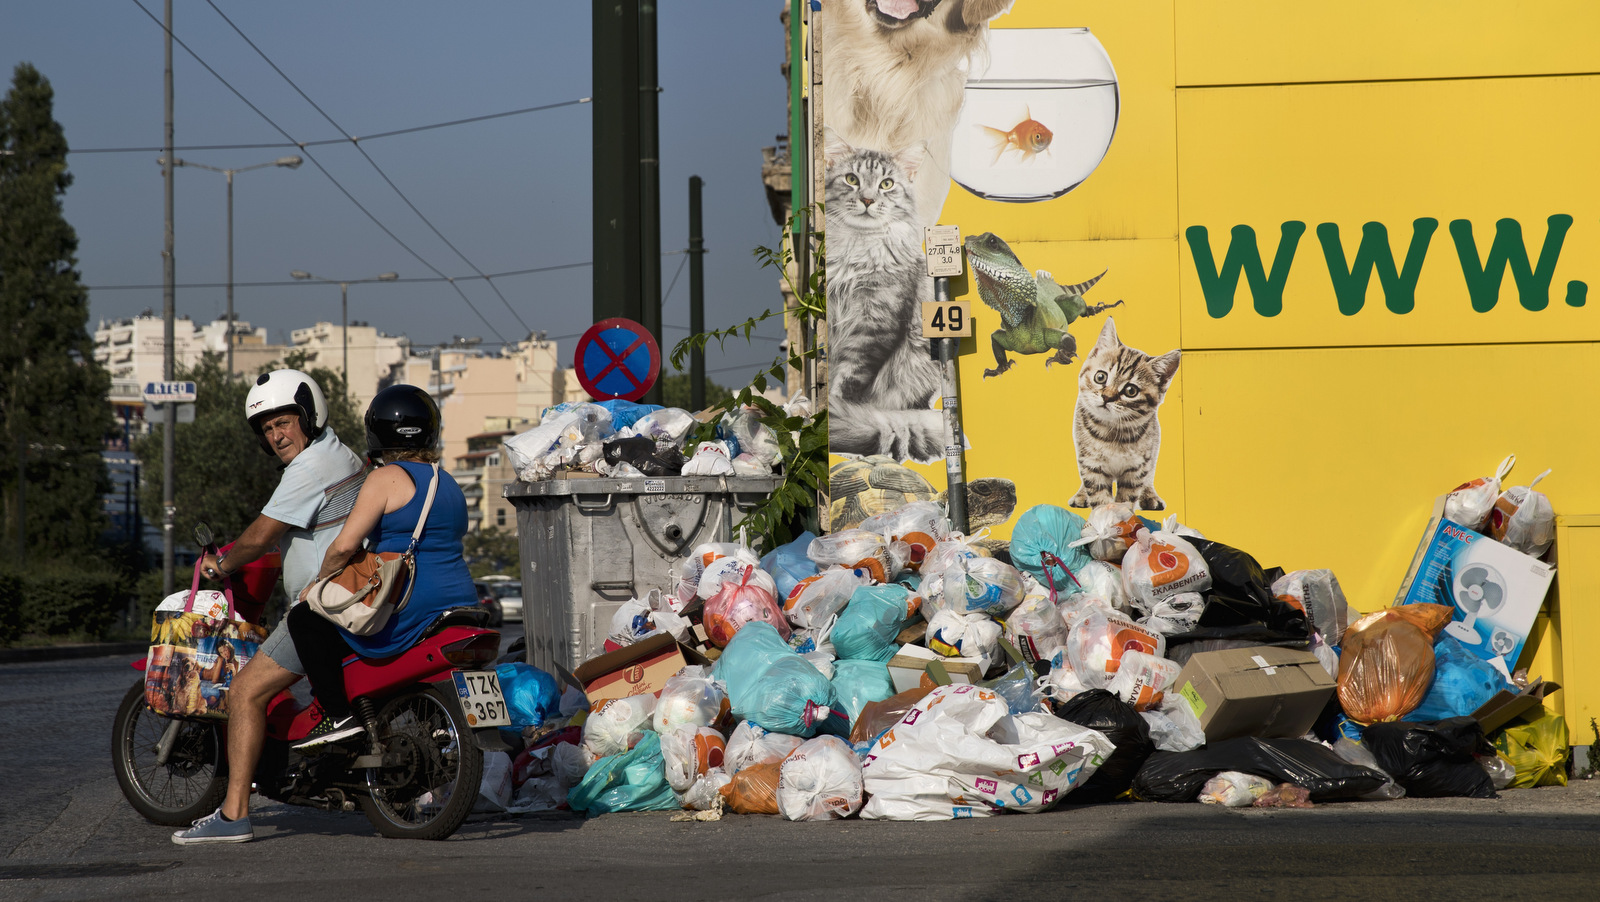 A motorcyclist looks on as he drives next to a pile of garbage in Piraeus, near Athens, on Monday, June 26, 2017. Municipality workers have been on strike for almost a week , hindering trash collection across the country. (AP/Petros Giannakouris)